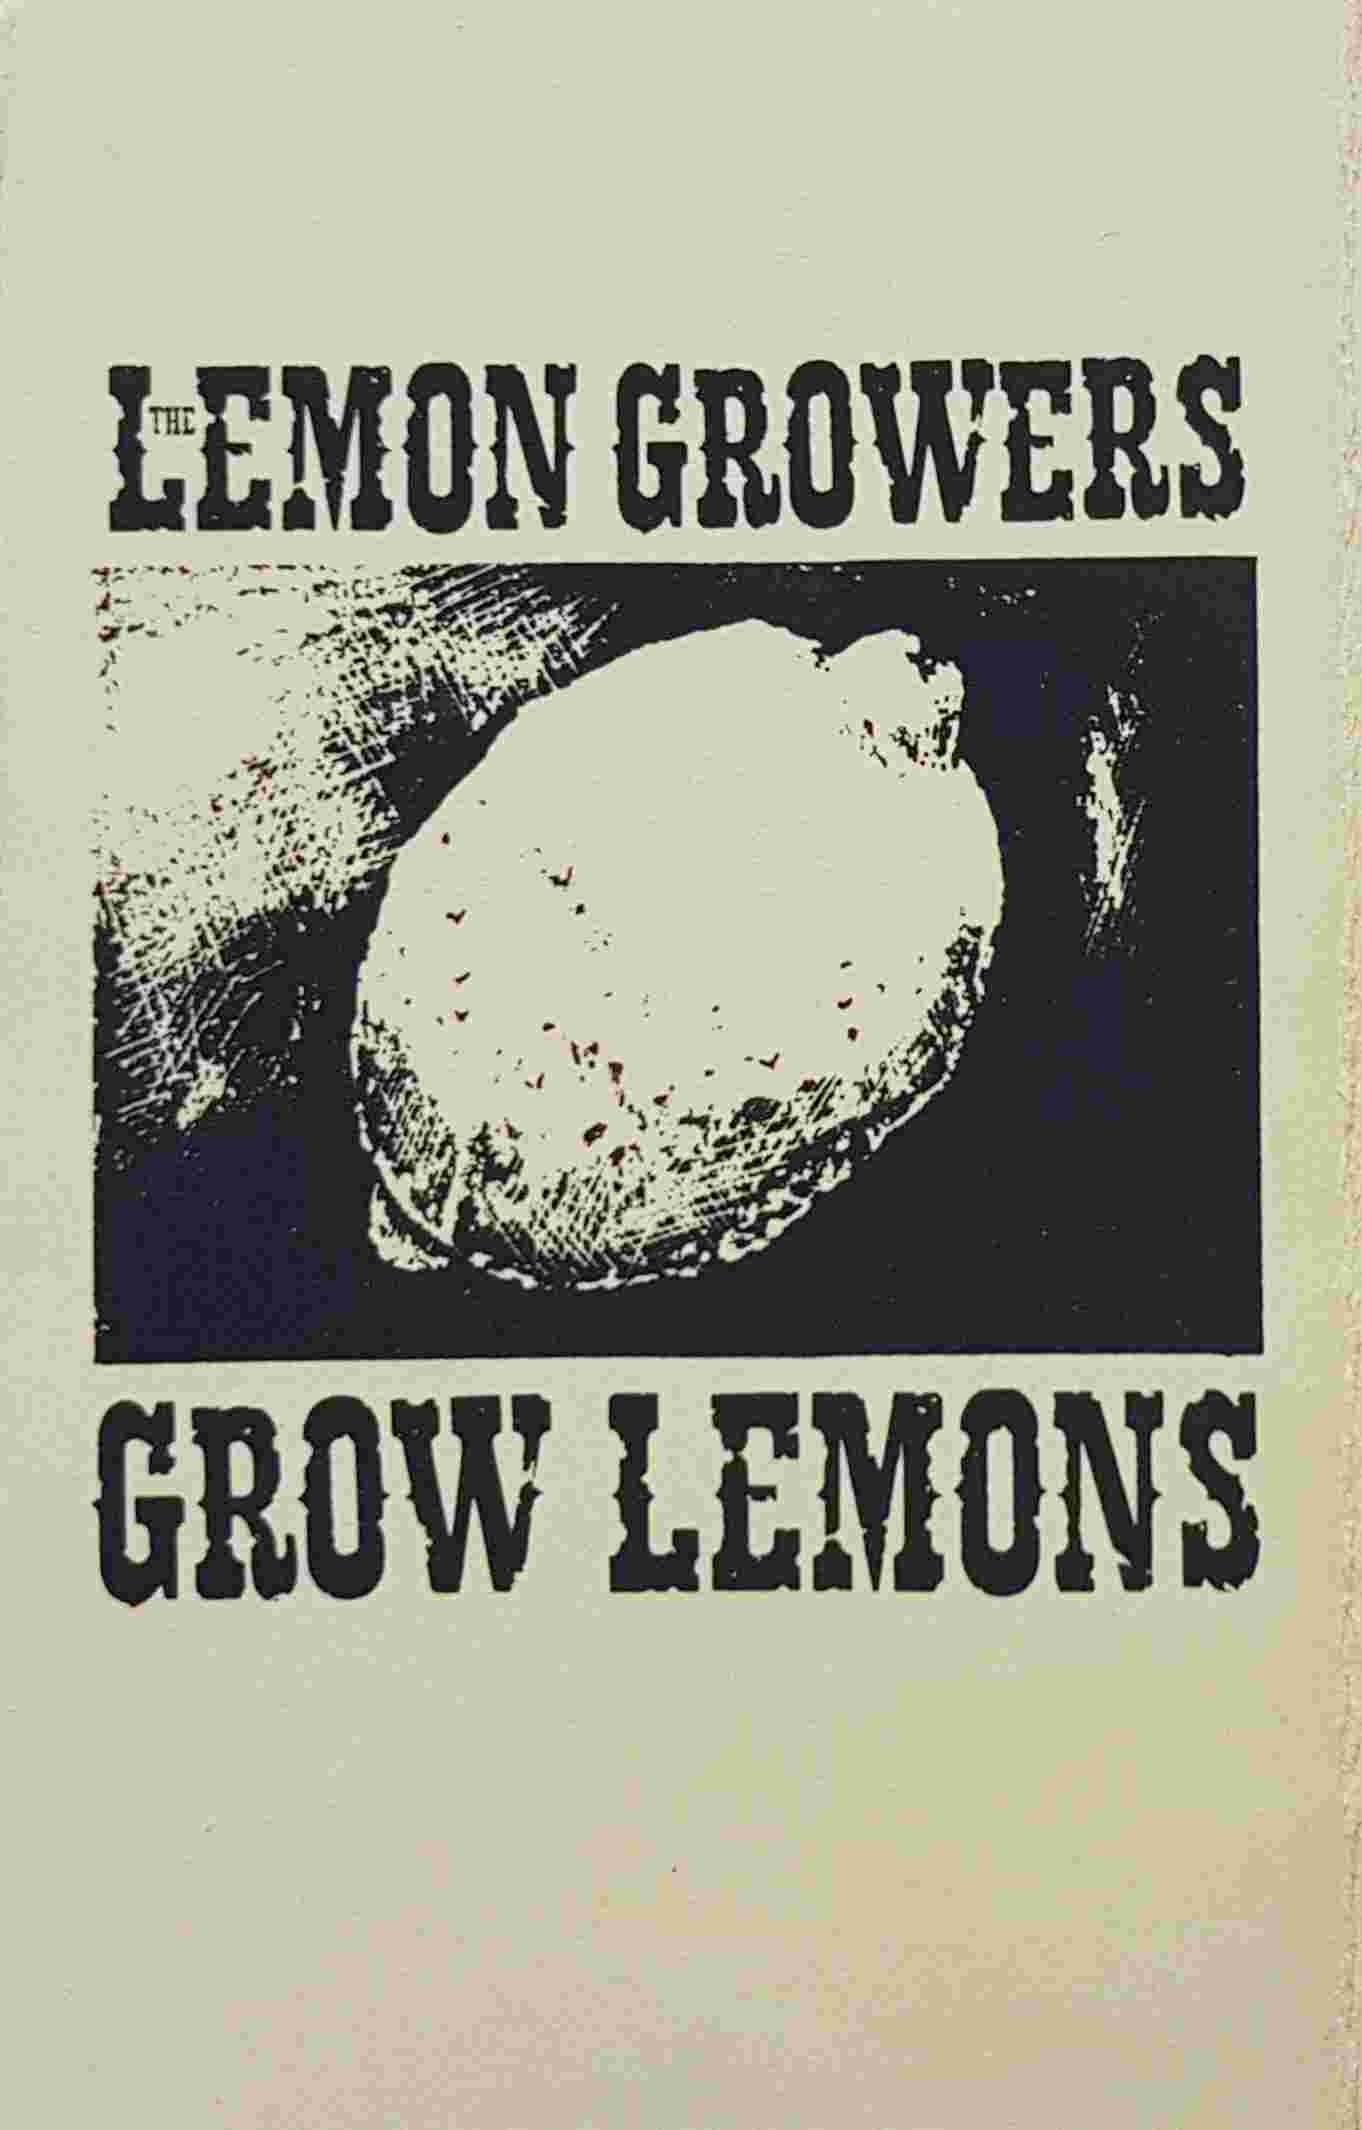 Picture of cassettes-GL Grow Lemons by artist The Lemon Growers